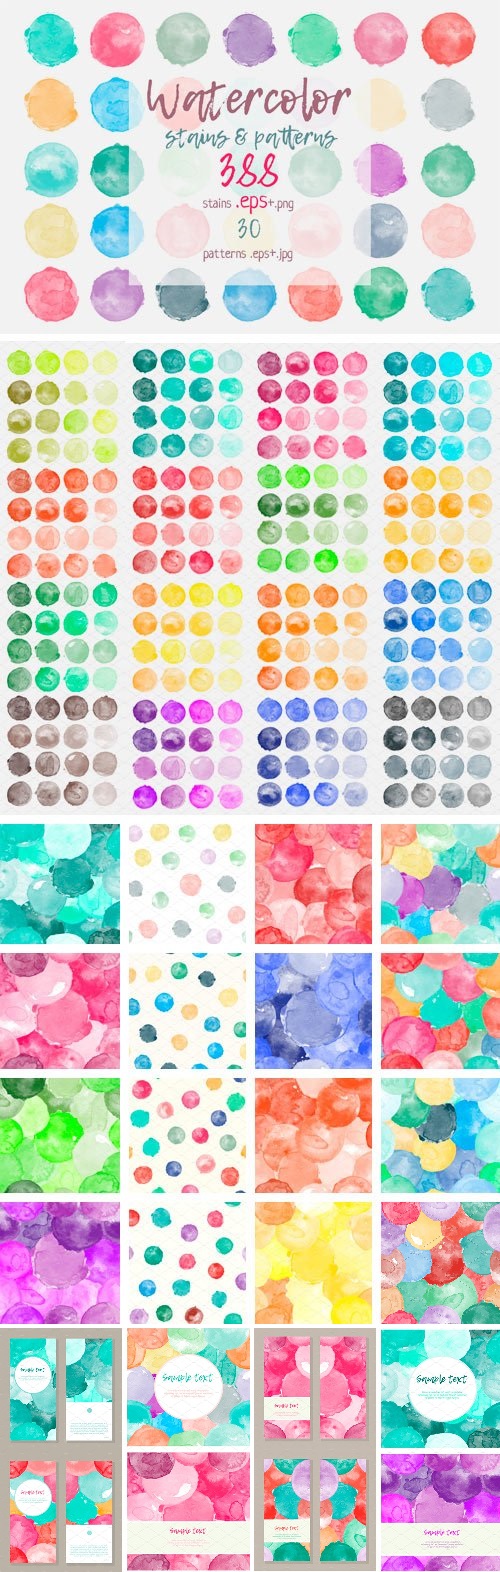 Big Set Watercolor Stains & Patterns - 2294133